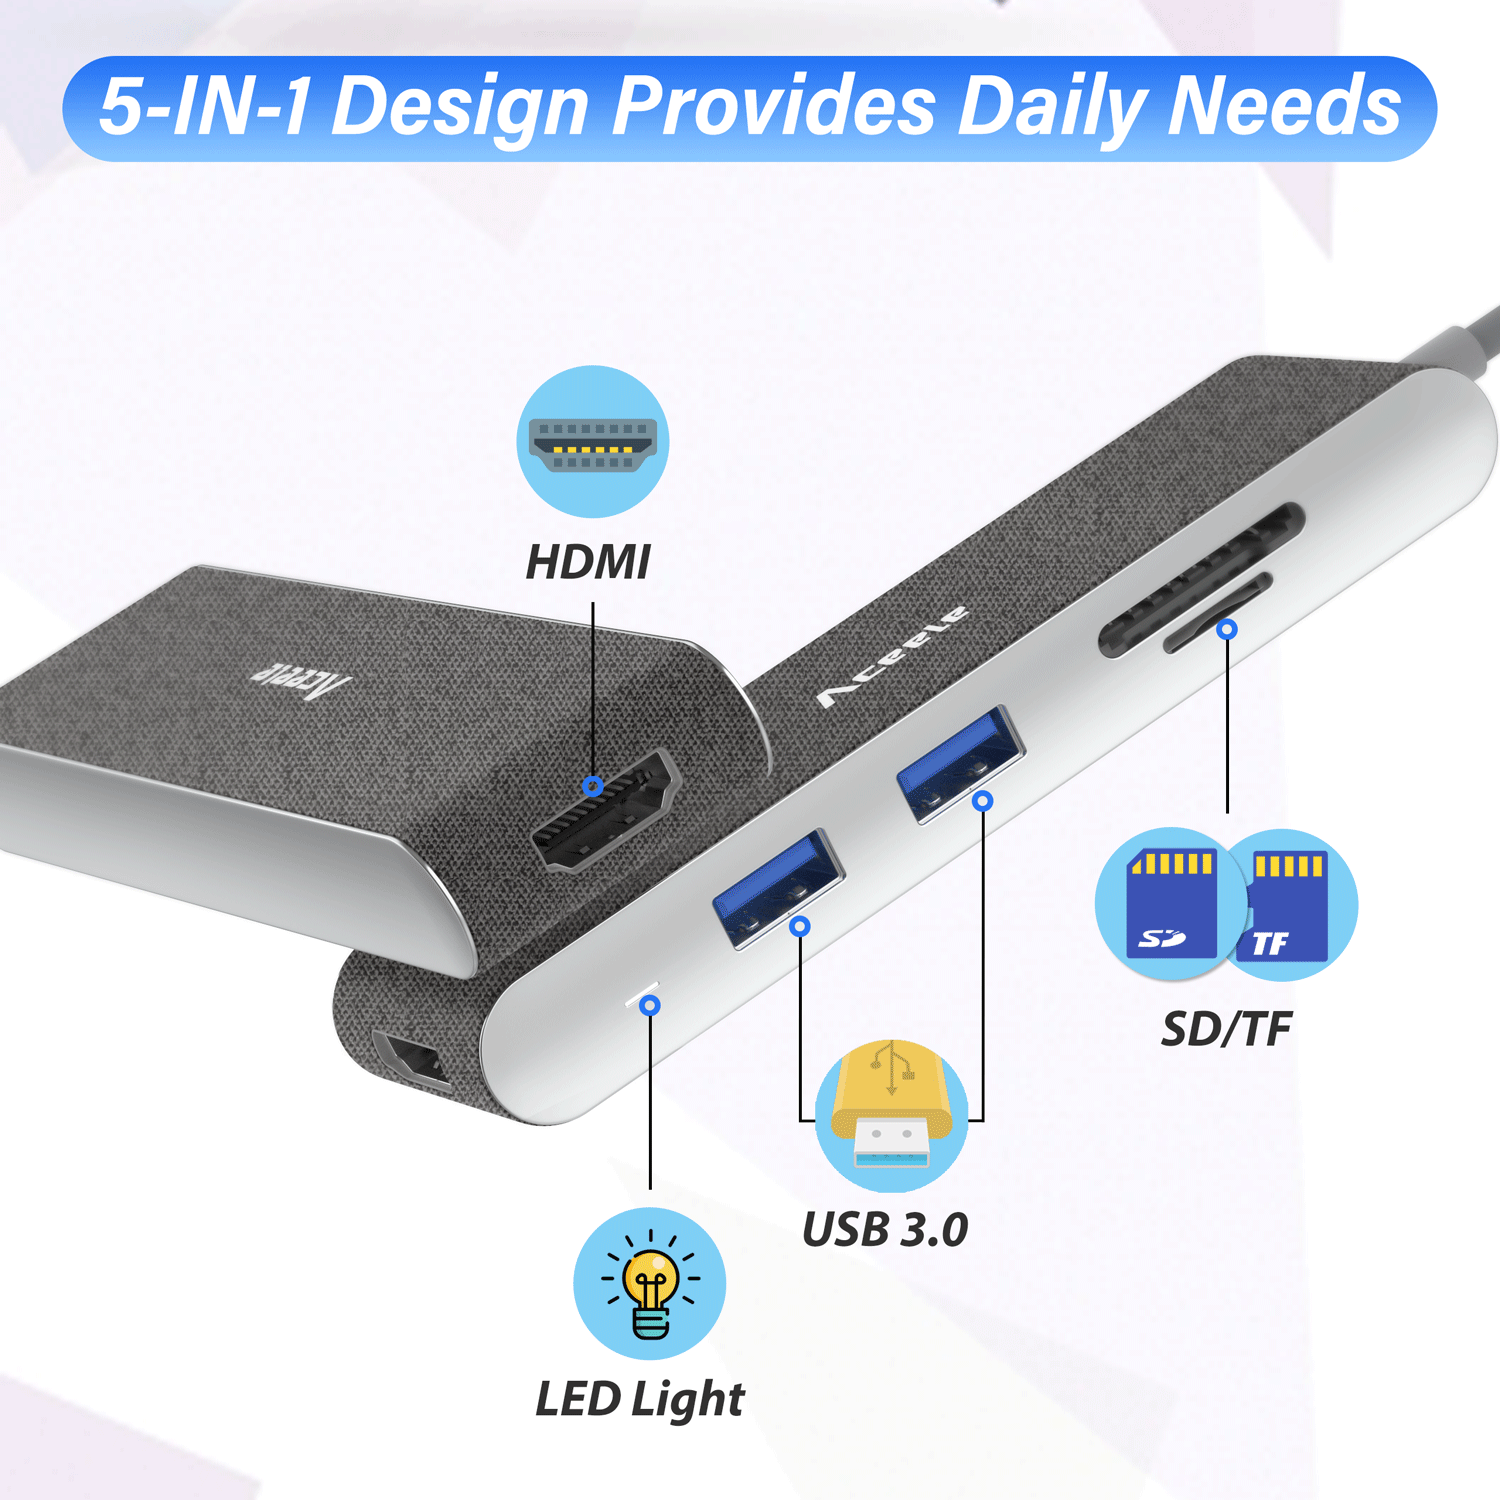 03-90360 5 in 1 USB C Hub, Aceele USB C Multiport Adapter 4K HDMI Port USB C Hub with 2 USB 3.0 Ports, SD / Micro SD Reader for Macbook Pro / Air (Thunderbolt 3) Dell XPS Huawei Mate 20 Type C Devices